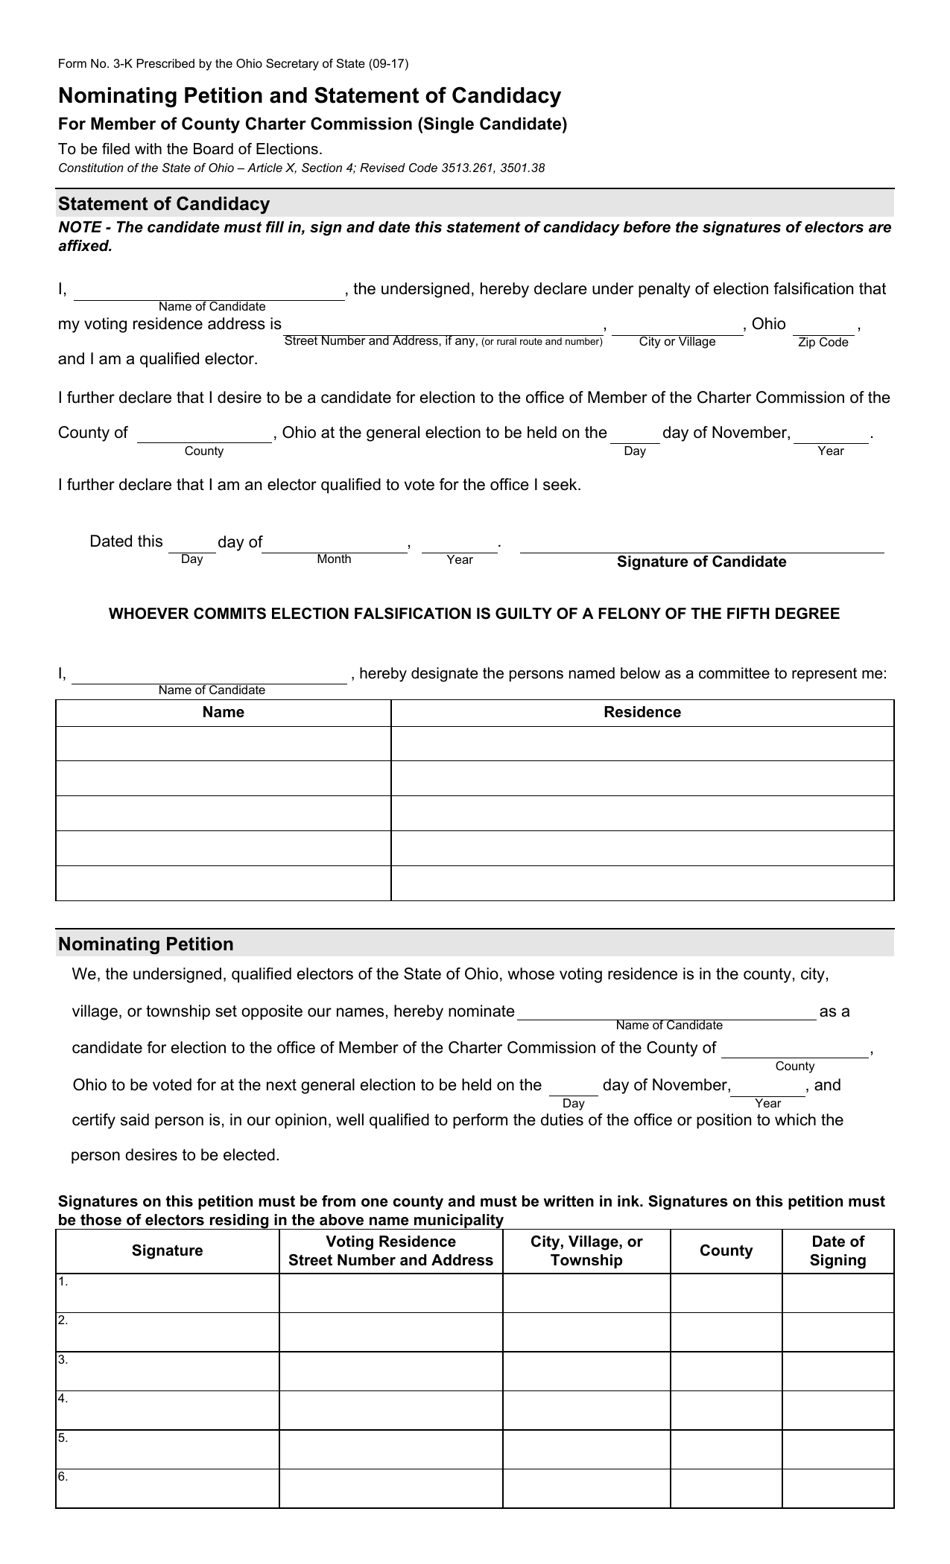 Form 3-K Nominating Petition and Statement of Candidacy for Member of County Charter Commission (Single Candidate) - Ohio, Page 1